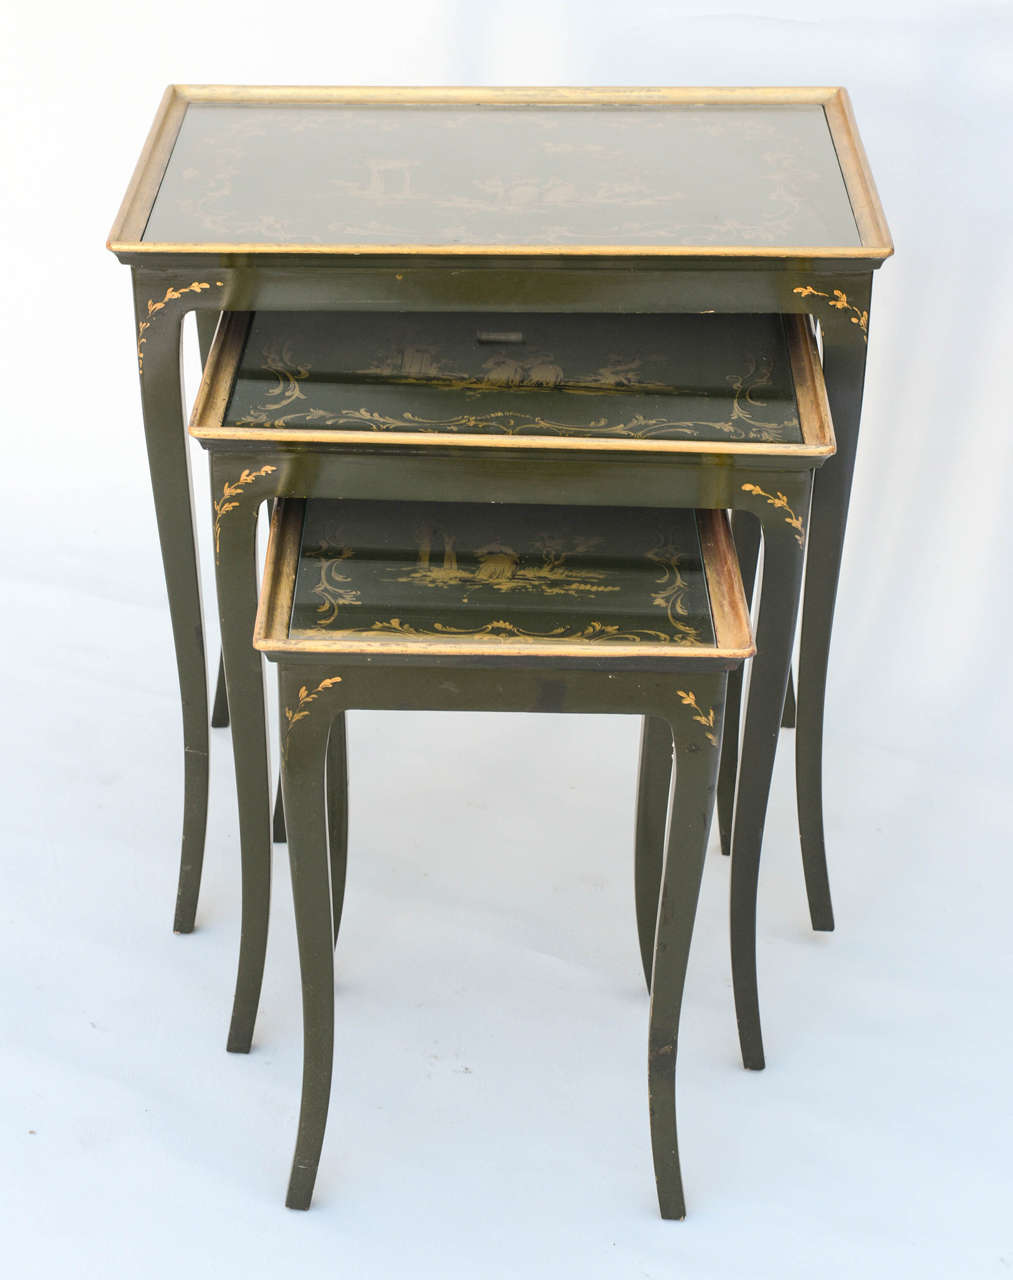 Set of three stack tables of dark green lacquer finish with gilt accents, each top decorated in chinoiserie motifs.